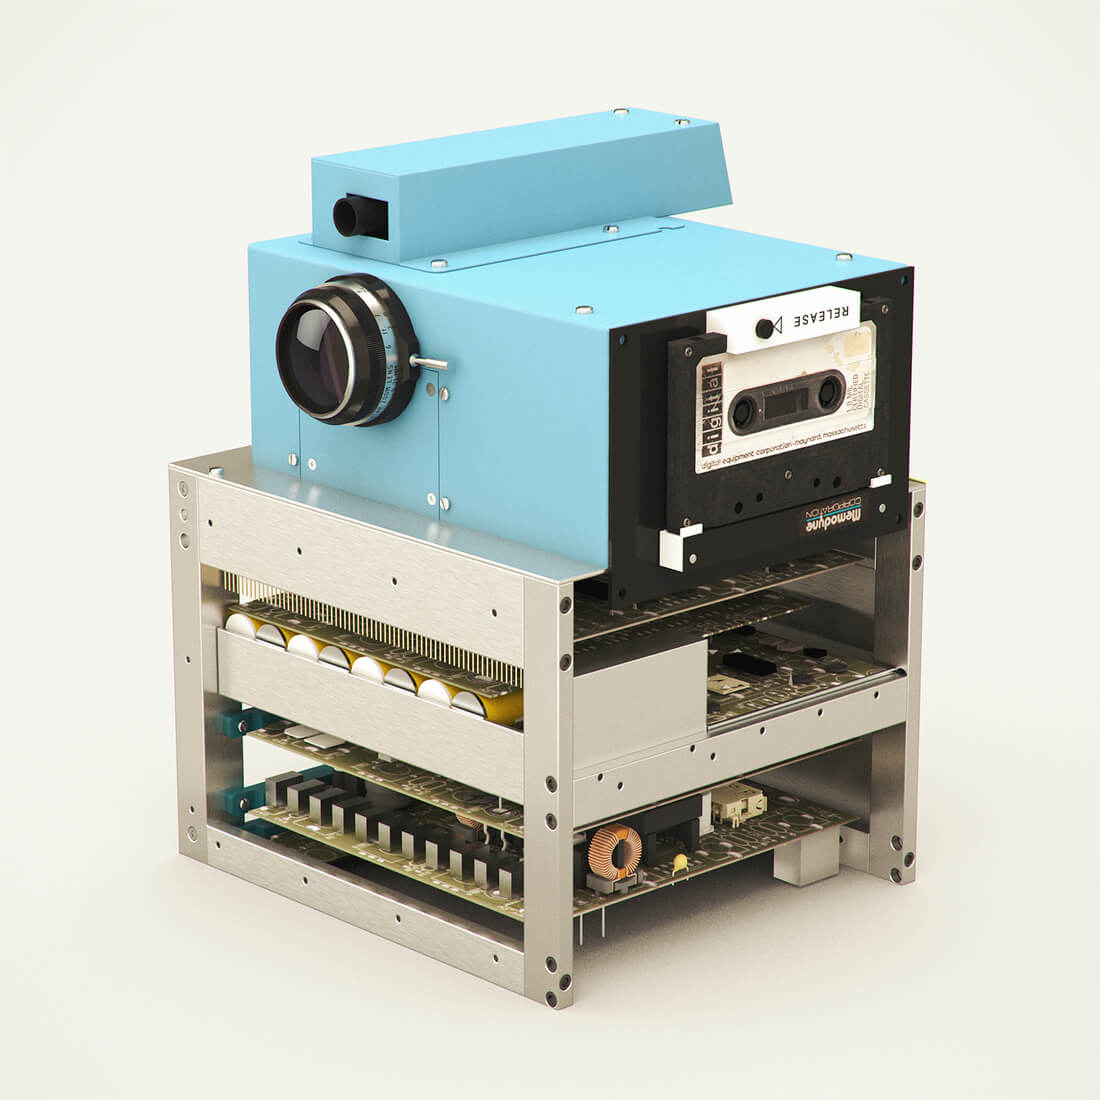 Image for Kodak Camera: this shows Kodak's first digital camera, with a light blue shell casing, and exposed circuitry